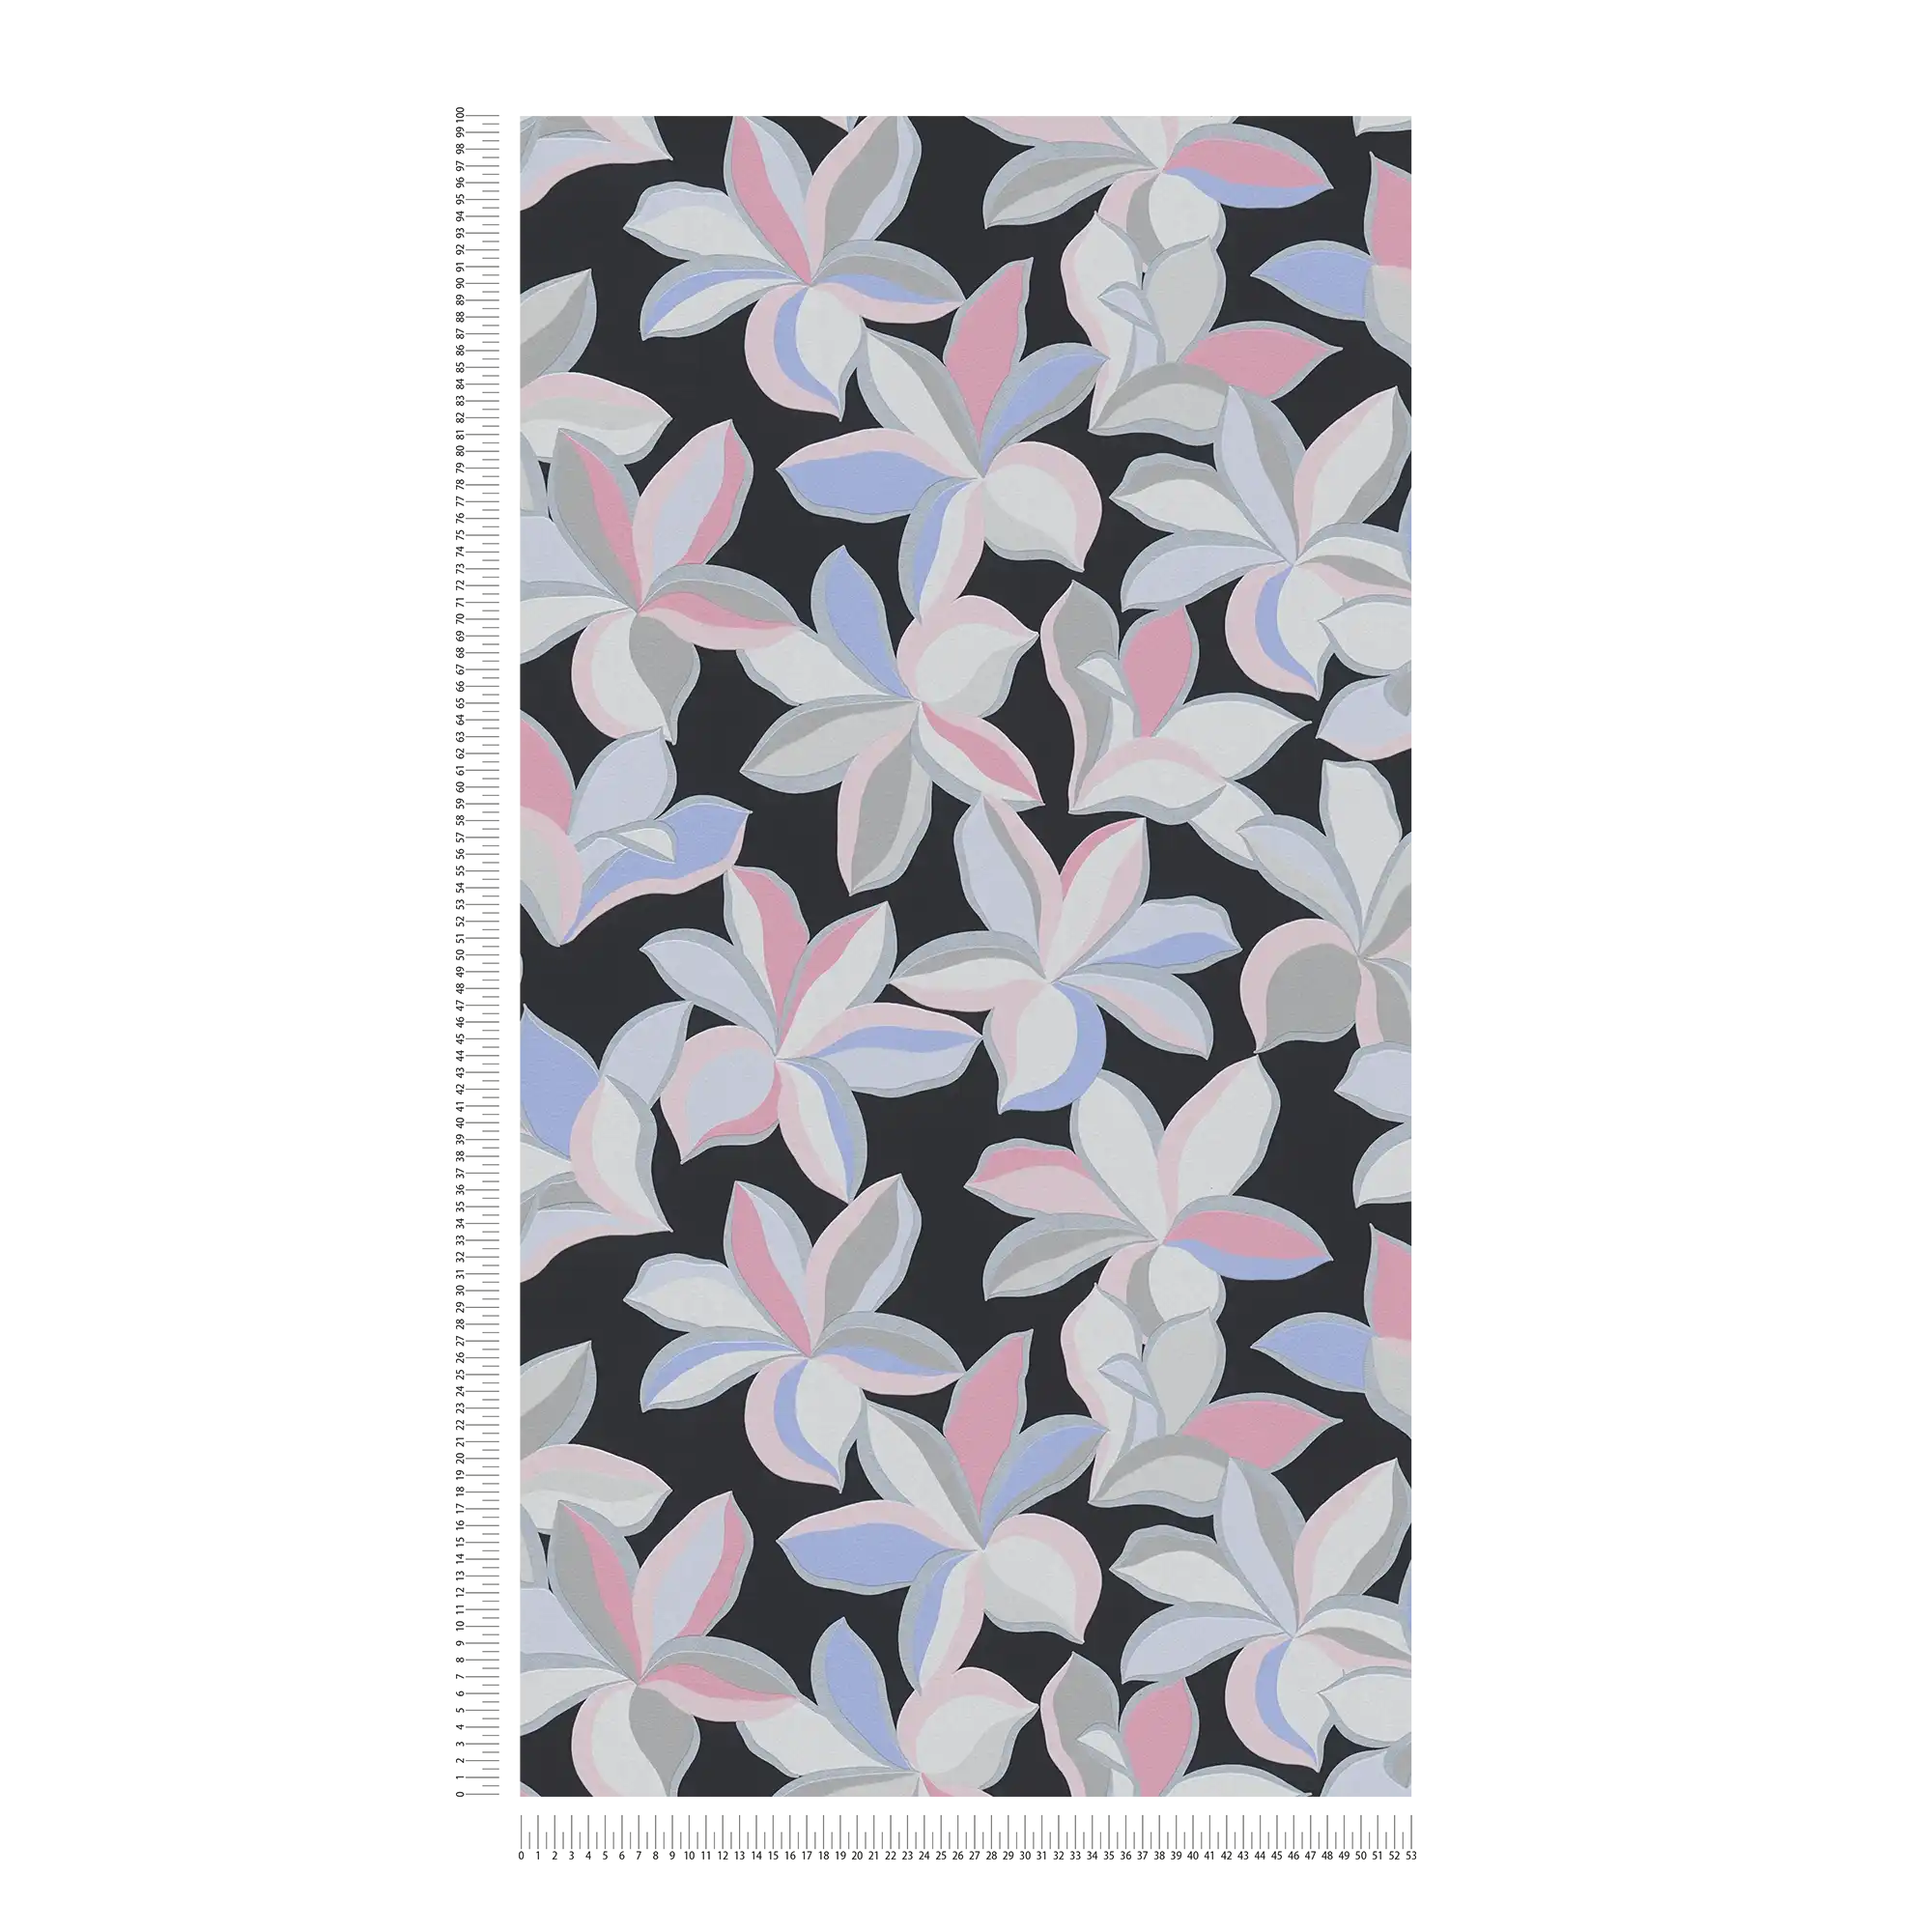             Floral pattern with glossy effect and fine texture - black, grey, pink
        